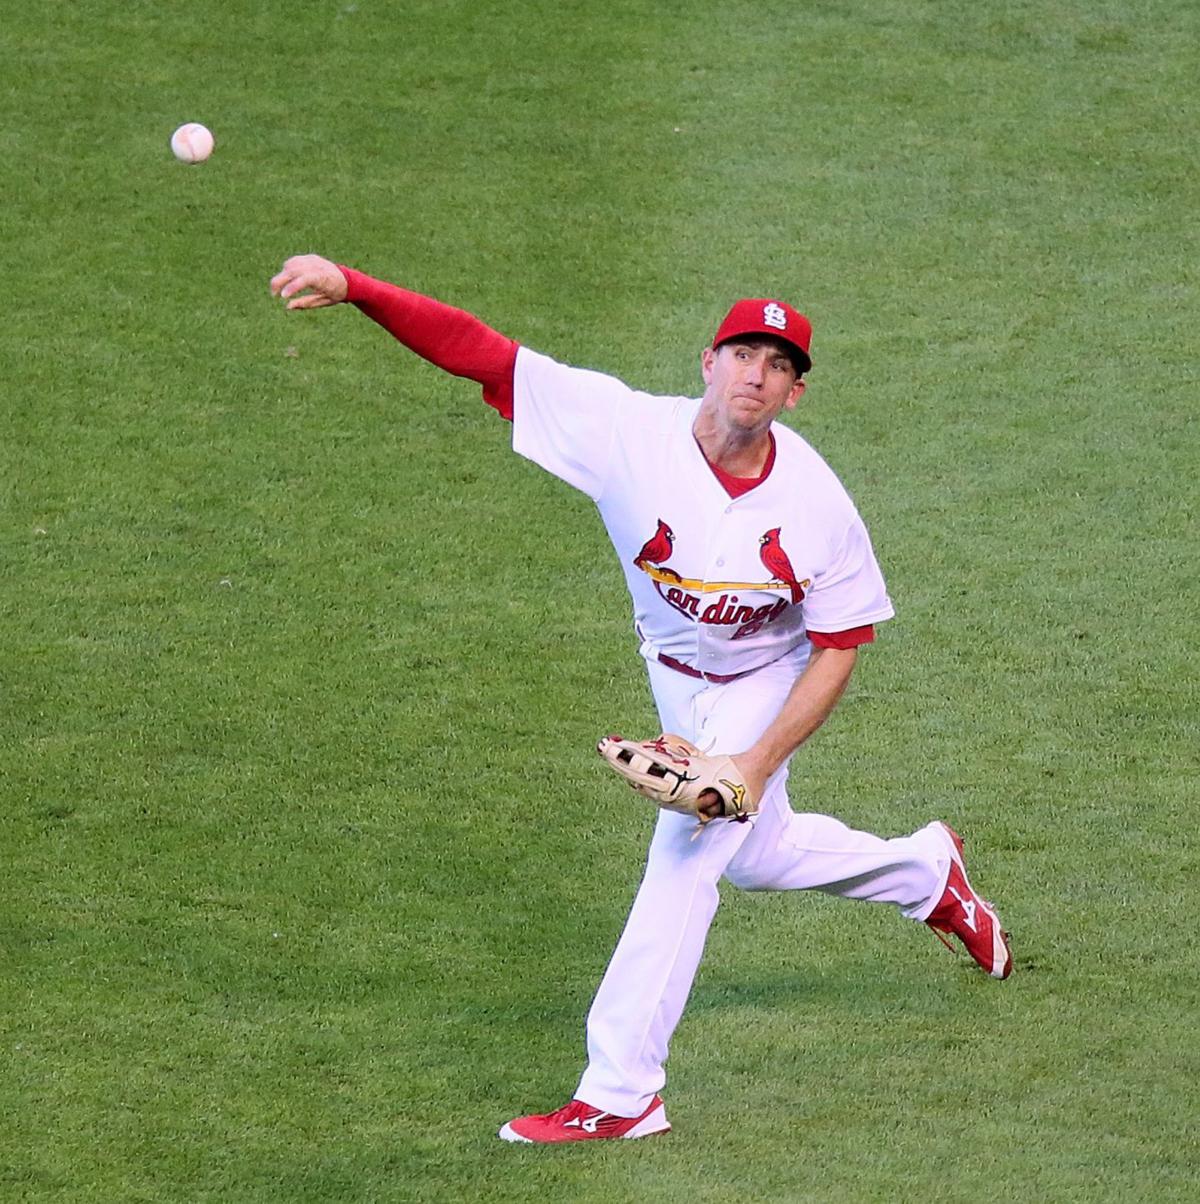 Cards lose to Brewers 6-4 | St. Louis Cardinals | www.semadata.org